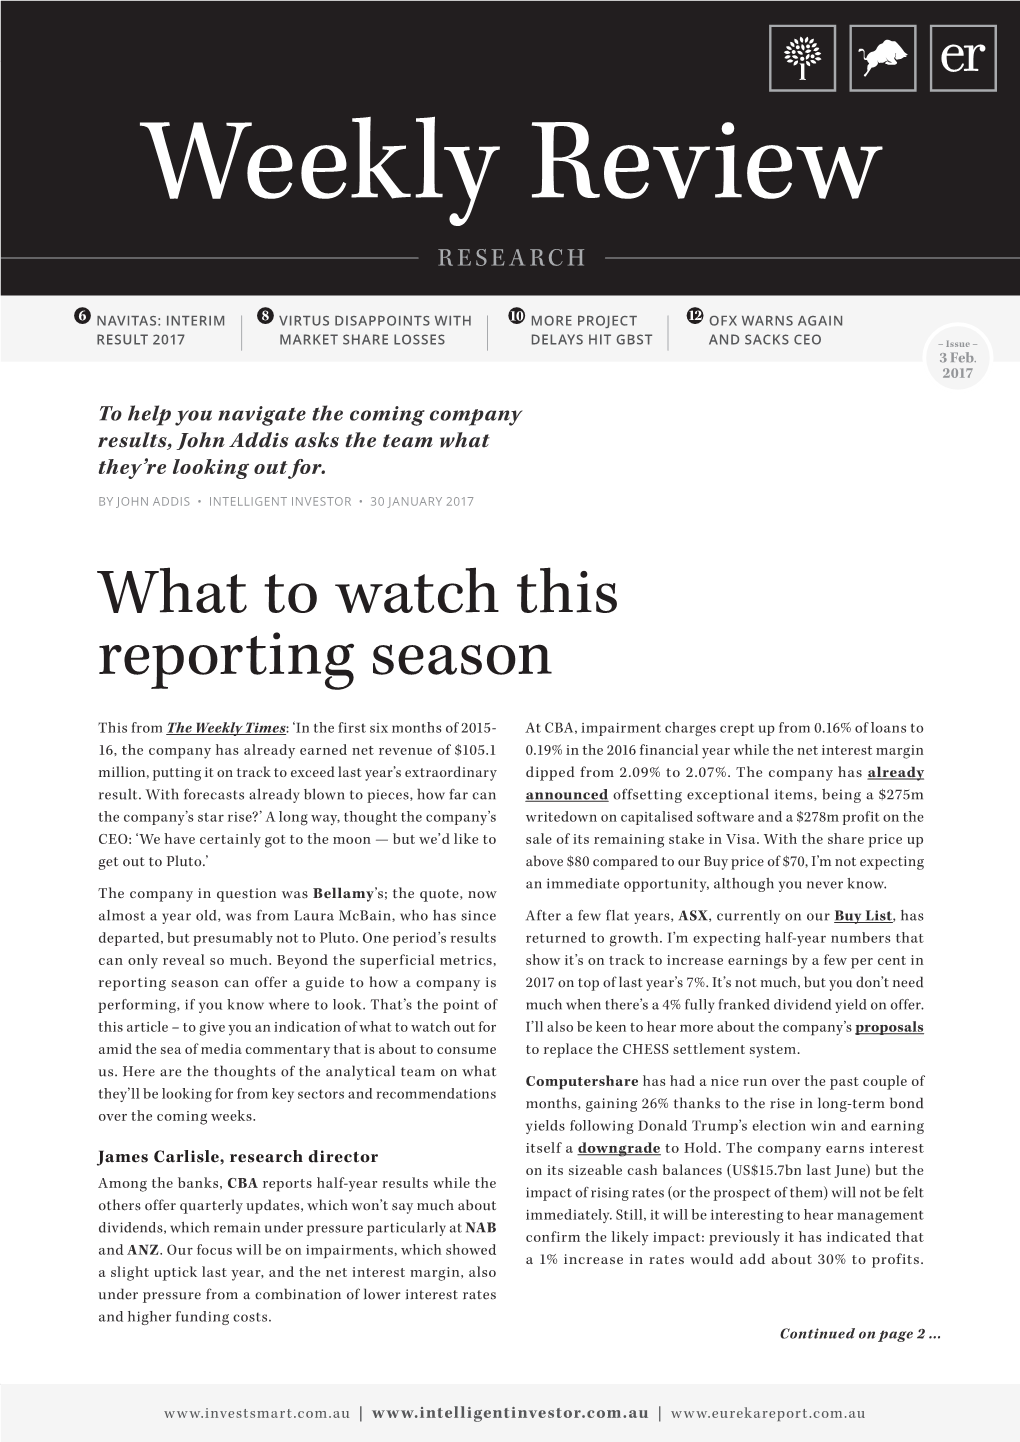 What to Watch This Reporting Season